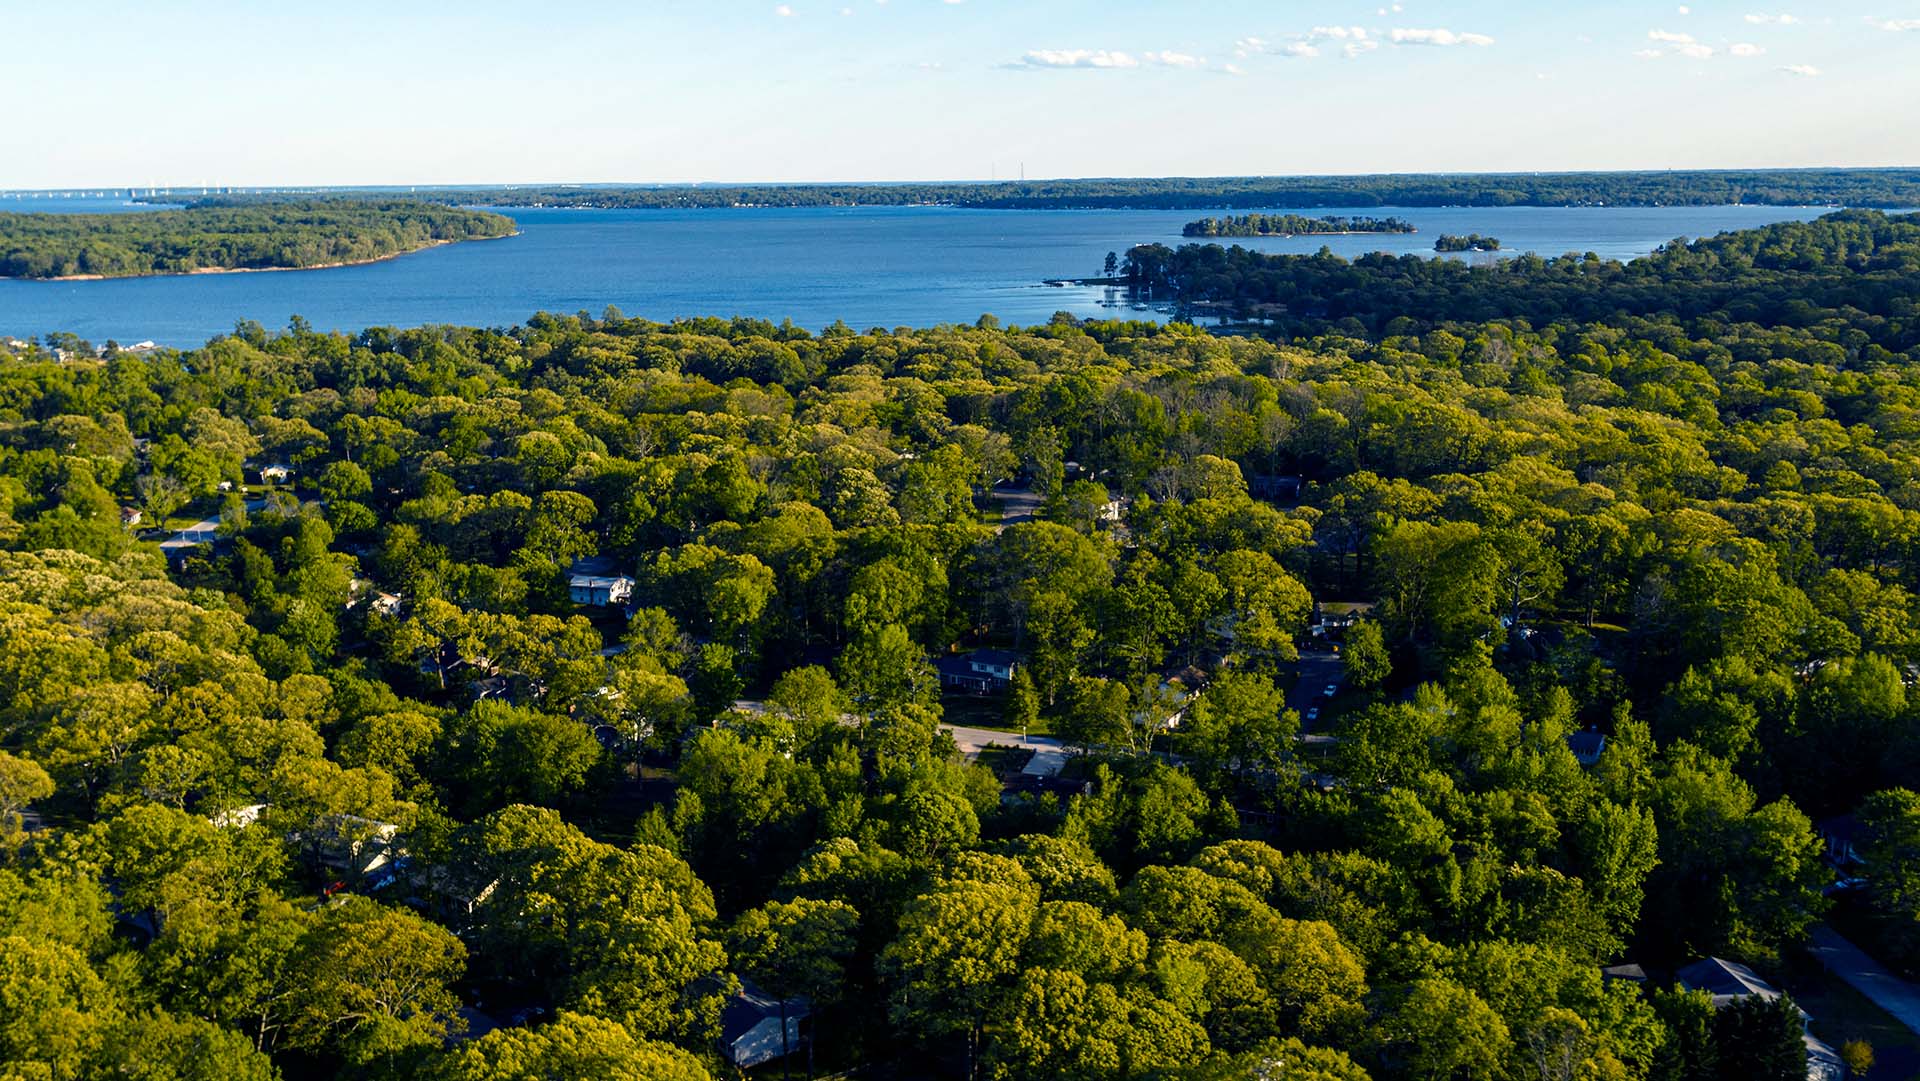 Aerial scenic view of the Chesapeake Bay in Pasedna, Maryland